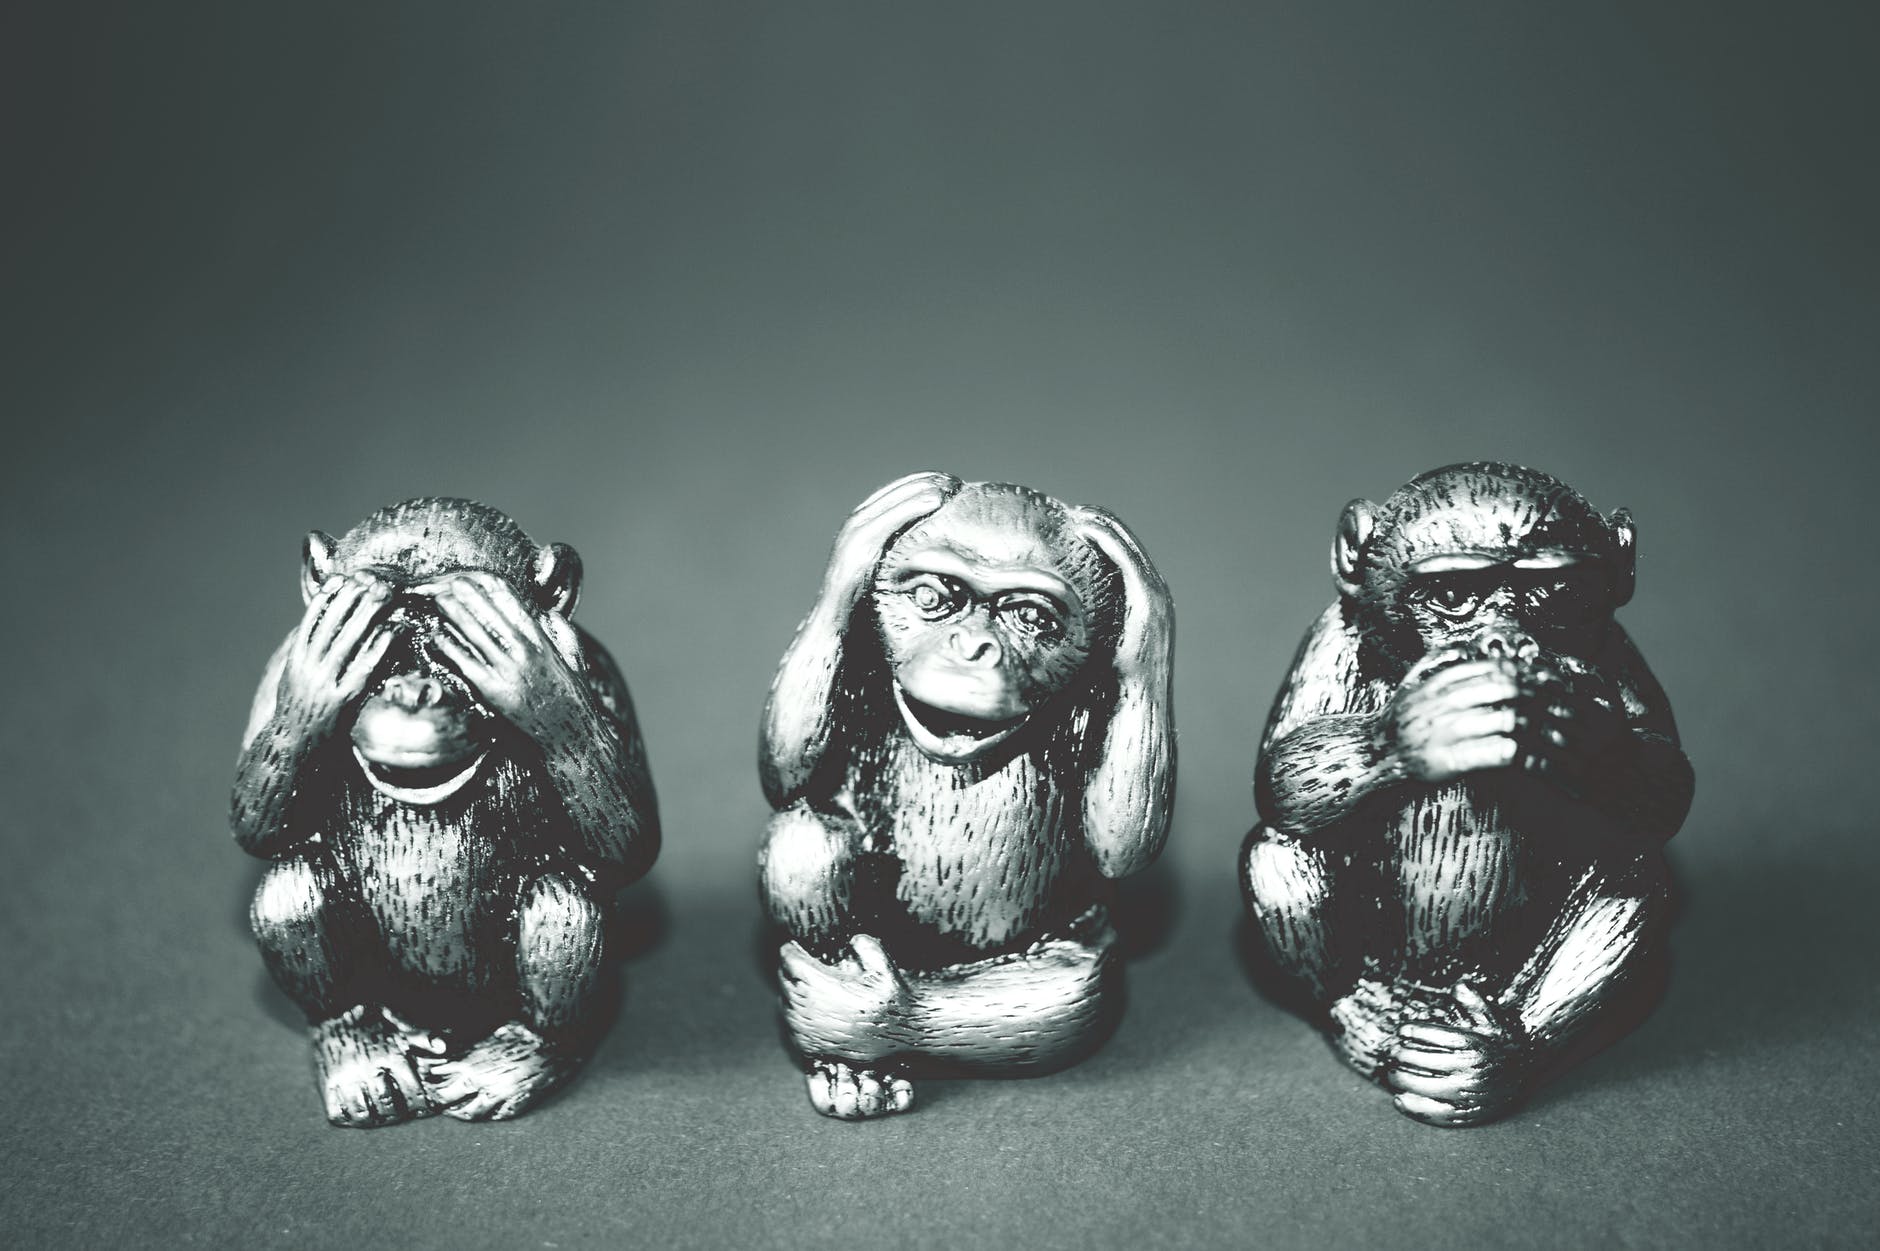 When a powerful idea doesn't quite work header image shows three brass monkeys in a row with the See no evil, hear no evil, speak no evil